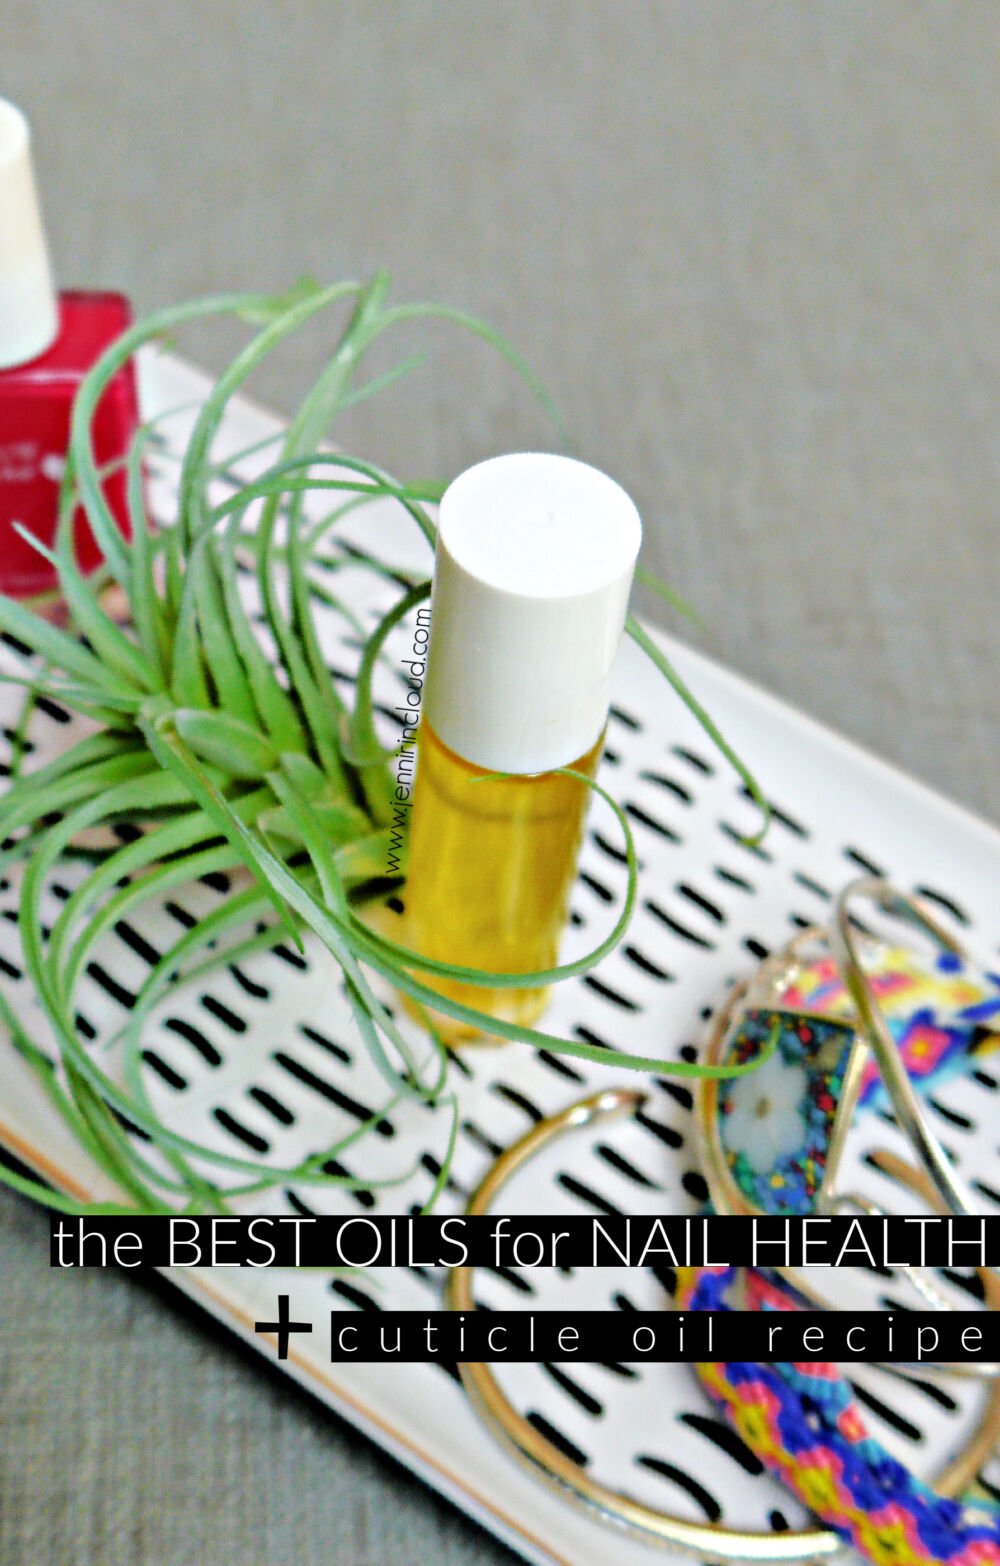 The Best Oils for Nails and DIY Cuticle Oil